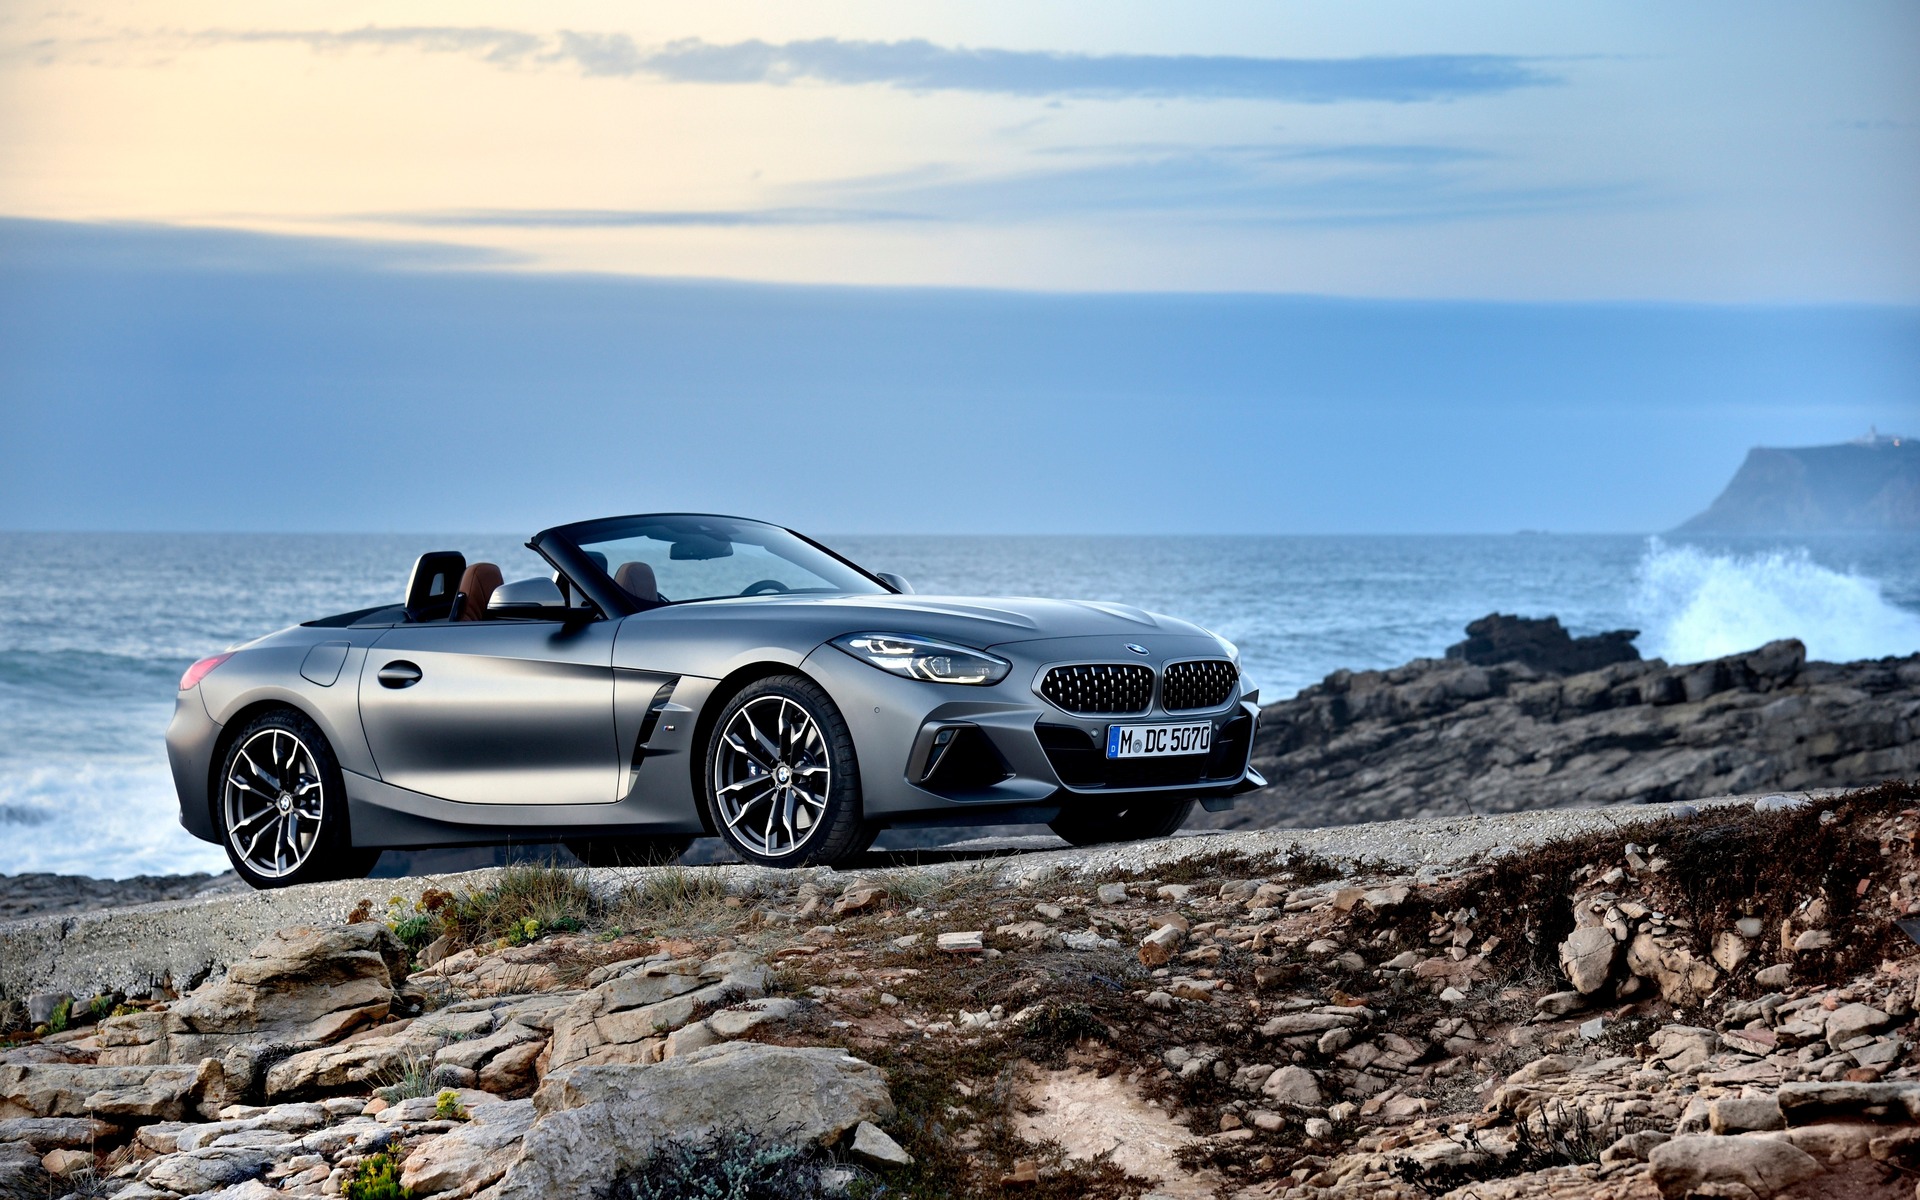 The cure for the blues: BMW Z4 M40i Roadster